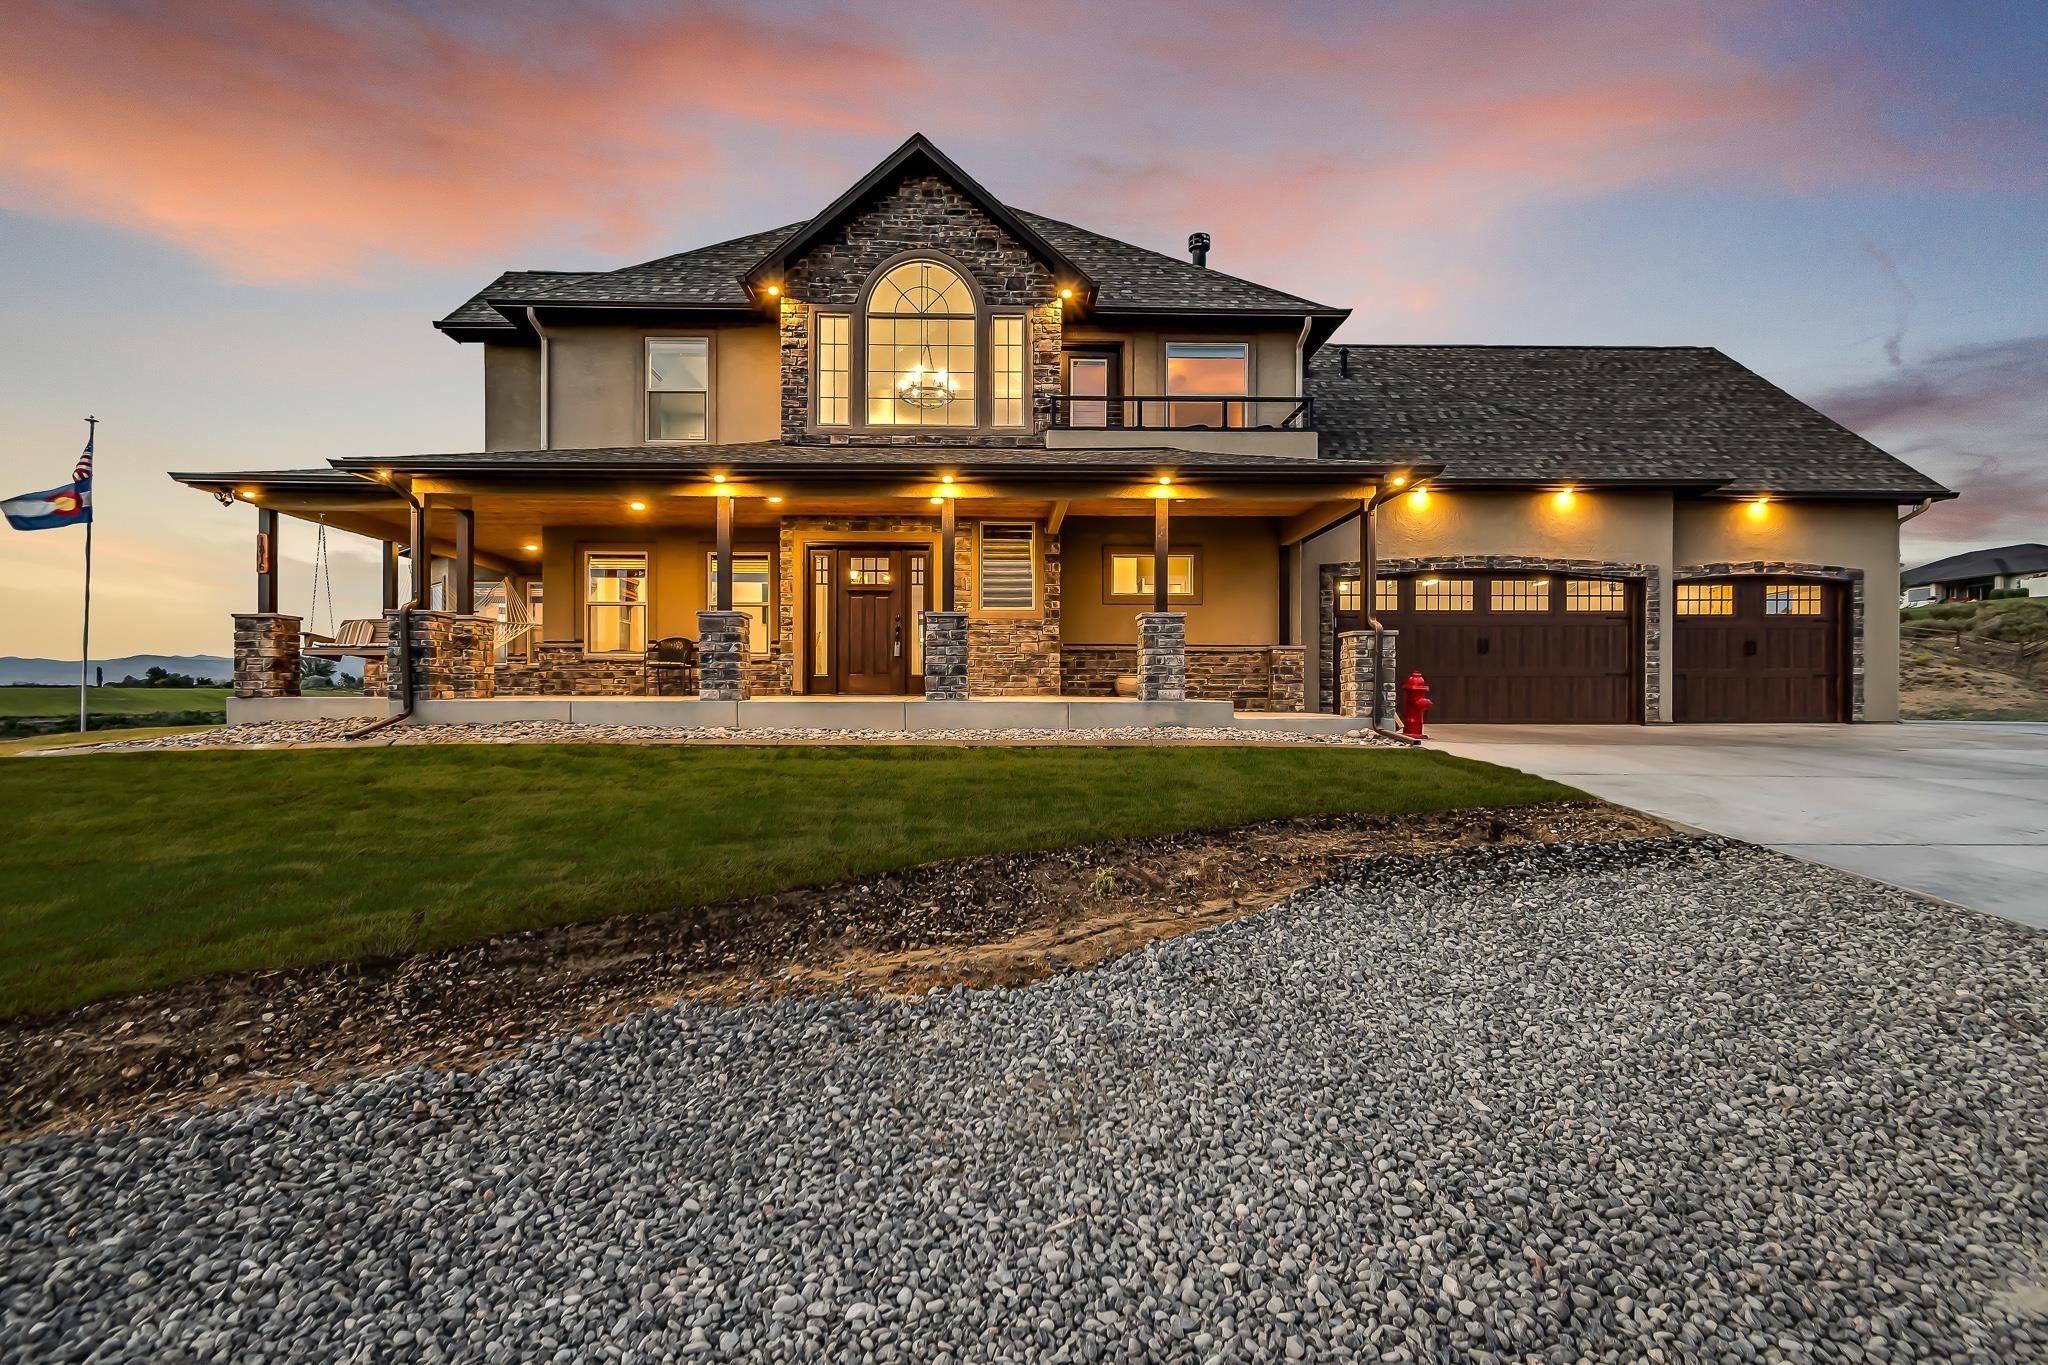 Country living & panoramic views are just the foundation to this sensational Elk Ridge custom-built home! This estate exudes pride of ownership with its pristine craftsmanship, high-end finishes, and professional landscaping. It boasts privacy without isolation, as you take in the 360 degree views of the Grand Valley on 5.94 acres bordering BLM land. The interior of the home invites you into a stunning foyer with beautiful engineered hardwood flooring. Accompanied by two large living spaces, formal dining area, kitchen with granite countertops & stainless steel appliances with a plethora of natural lighting and stunning views. Upstairs you will find a gorgeous master suite with a private balcony to enjoy your morning coffee, along with two extensive bedrooms adjoined by a Jack-and-Jill bath, and a 3rd bedroom and/or office down the hall from the rec room, equipped with a kitchenette. This bonus space is ideal for entertaining; alternatively, it could easily be converted into an additional master suite or mother-in-law suite. Finish off the day, relaxing in the hammocks on the wrap around porch taking in those unobstructed, picturesque Bookcliff sunsets. No detail has gone missed in this estate, as it is the only custom-built home you will find in Mesa County with a firepole! It is the definition of luxury living in the countryside!